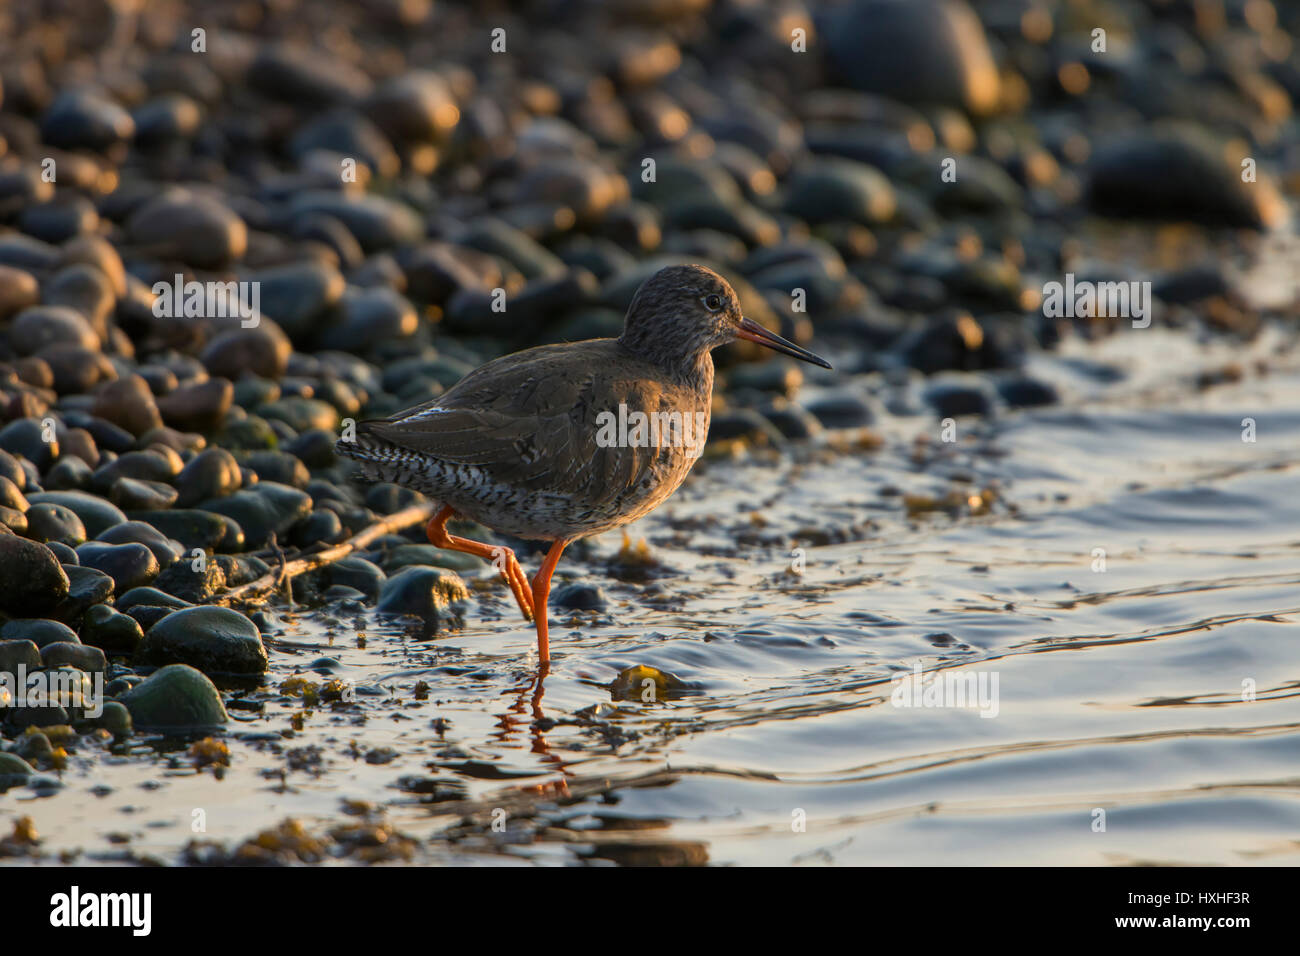 A Common Redshank (Tringa totanus) searching for food at waters edge in morning sun, Rye Harbour nature reserve, East Sussex, UK Stock Photo